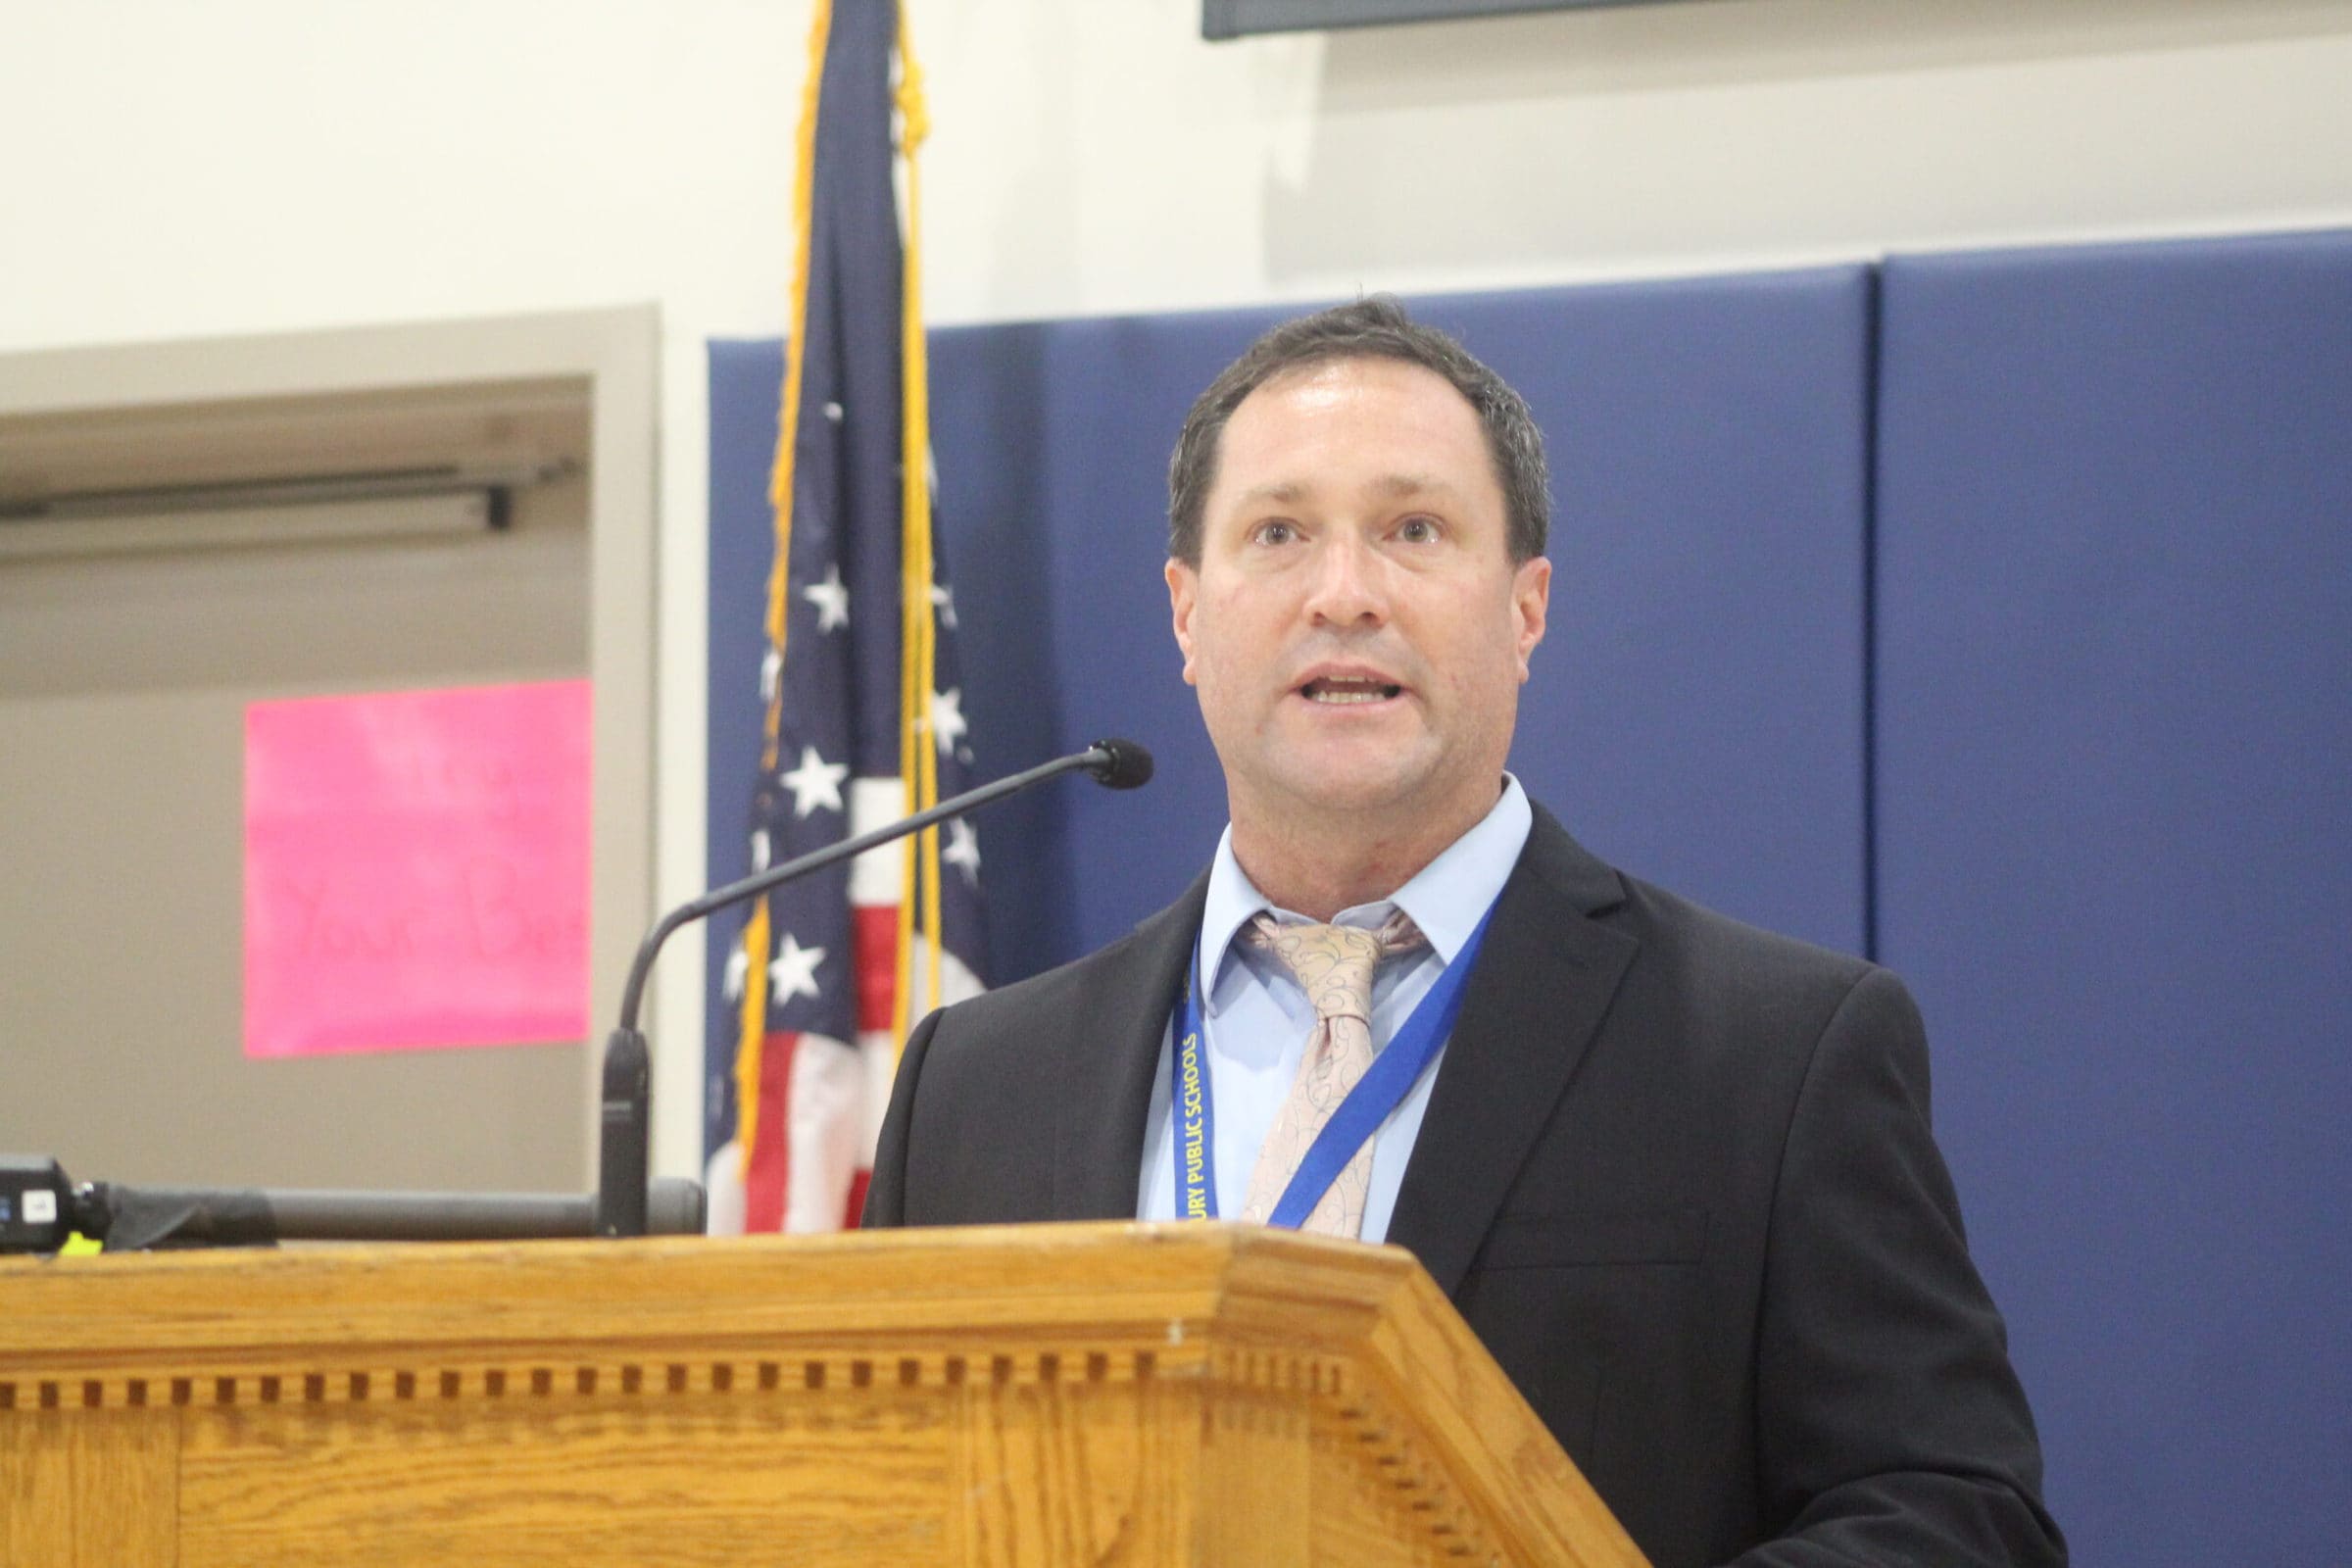 Beal principal named new assistant superintendent